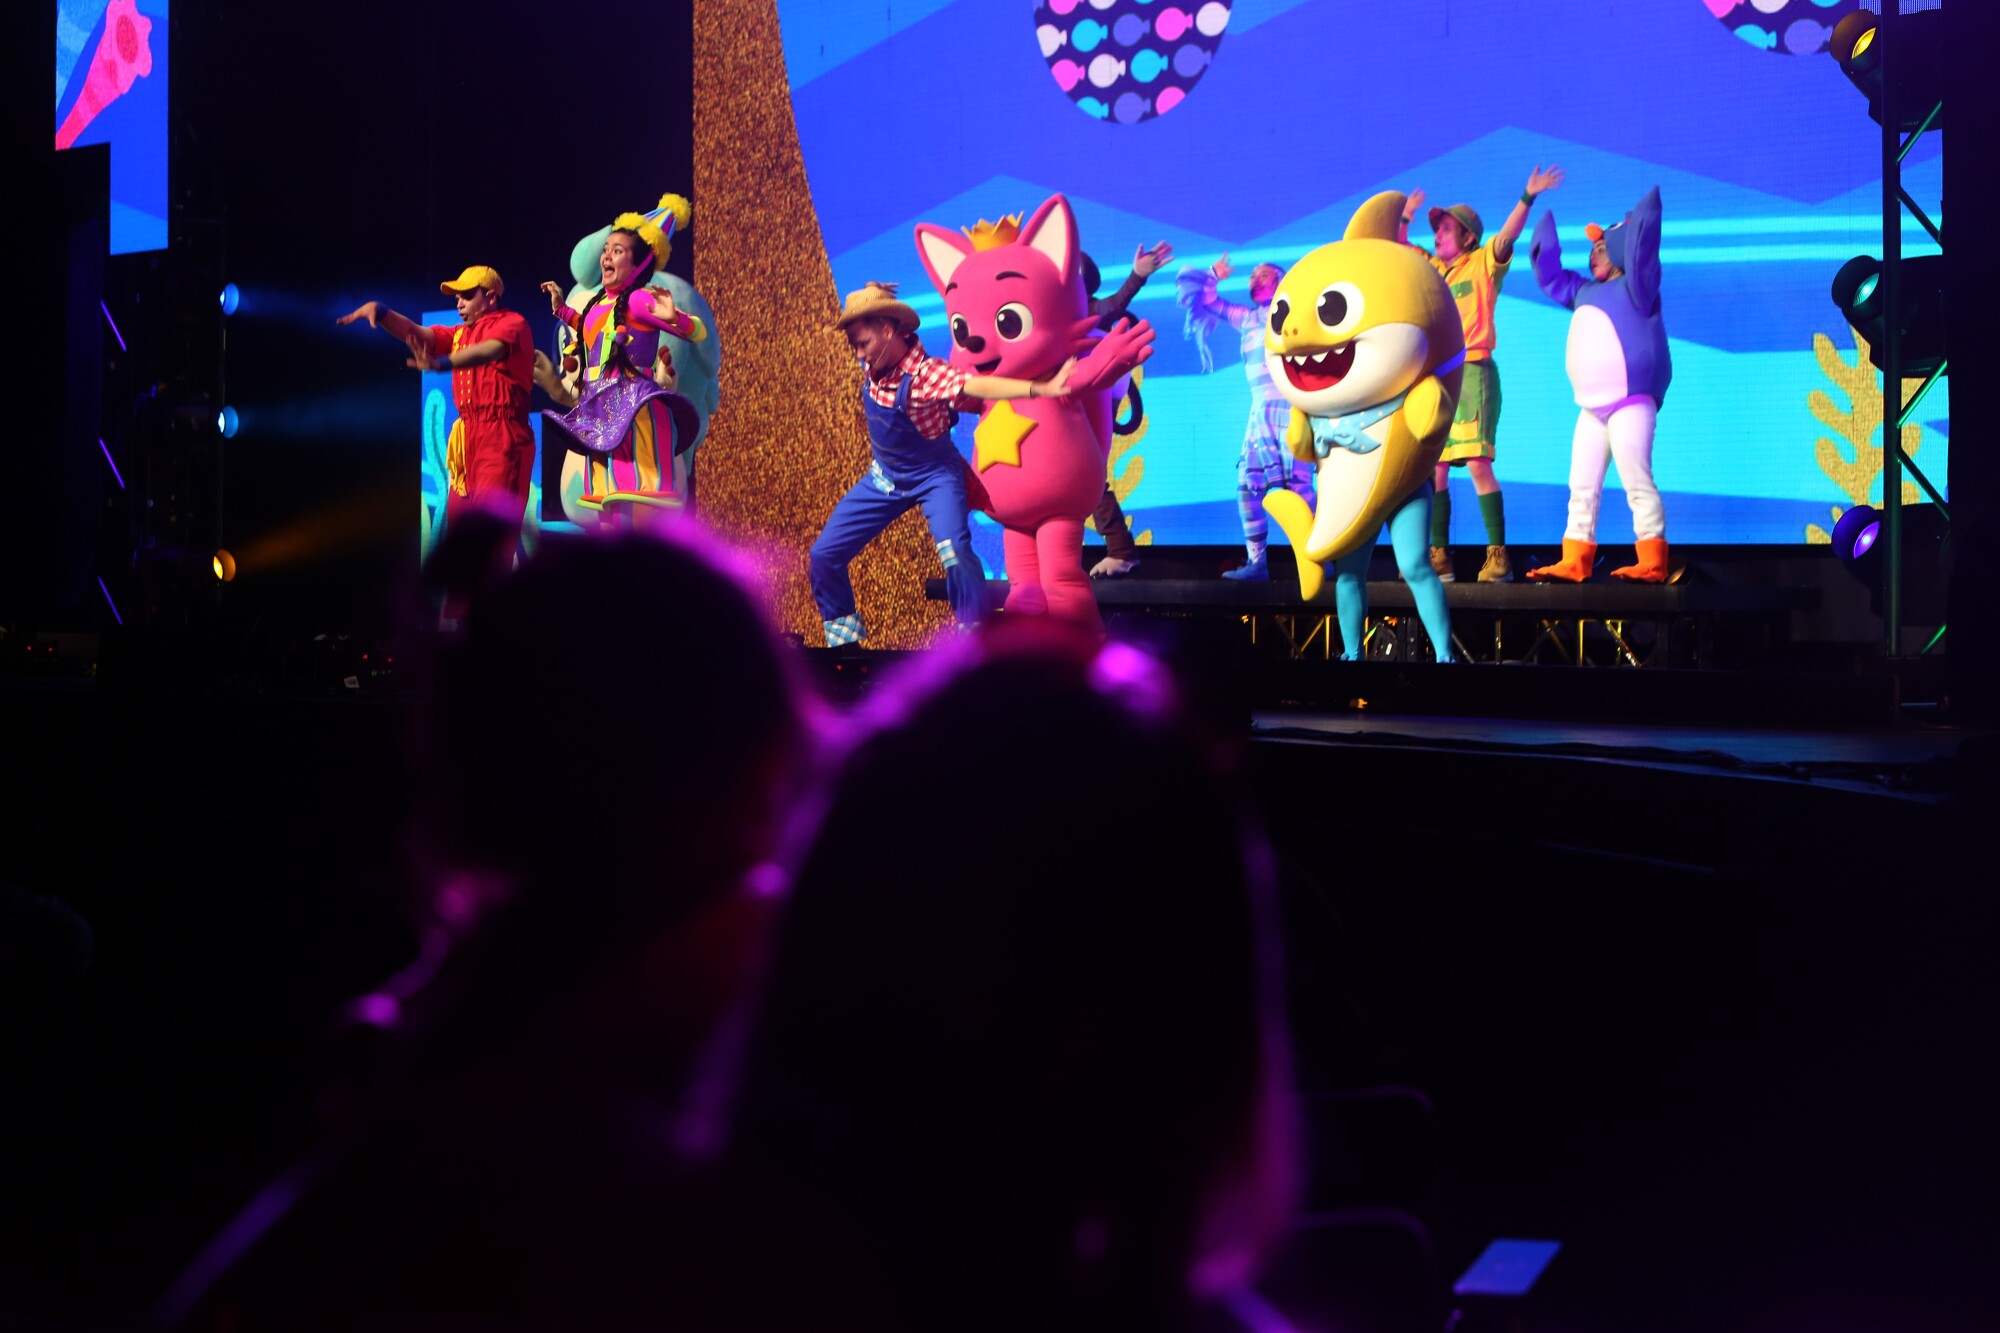 The inaugural U.S. tour of "Baby Shark Live!" features 20 Pinkfong songs and a ton of visual stimuli.